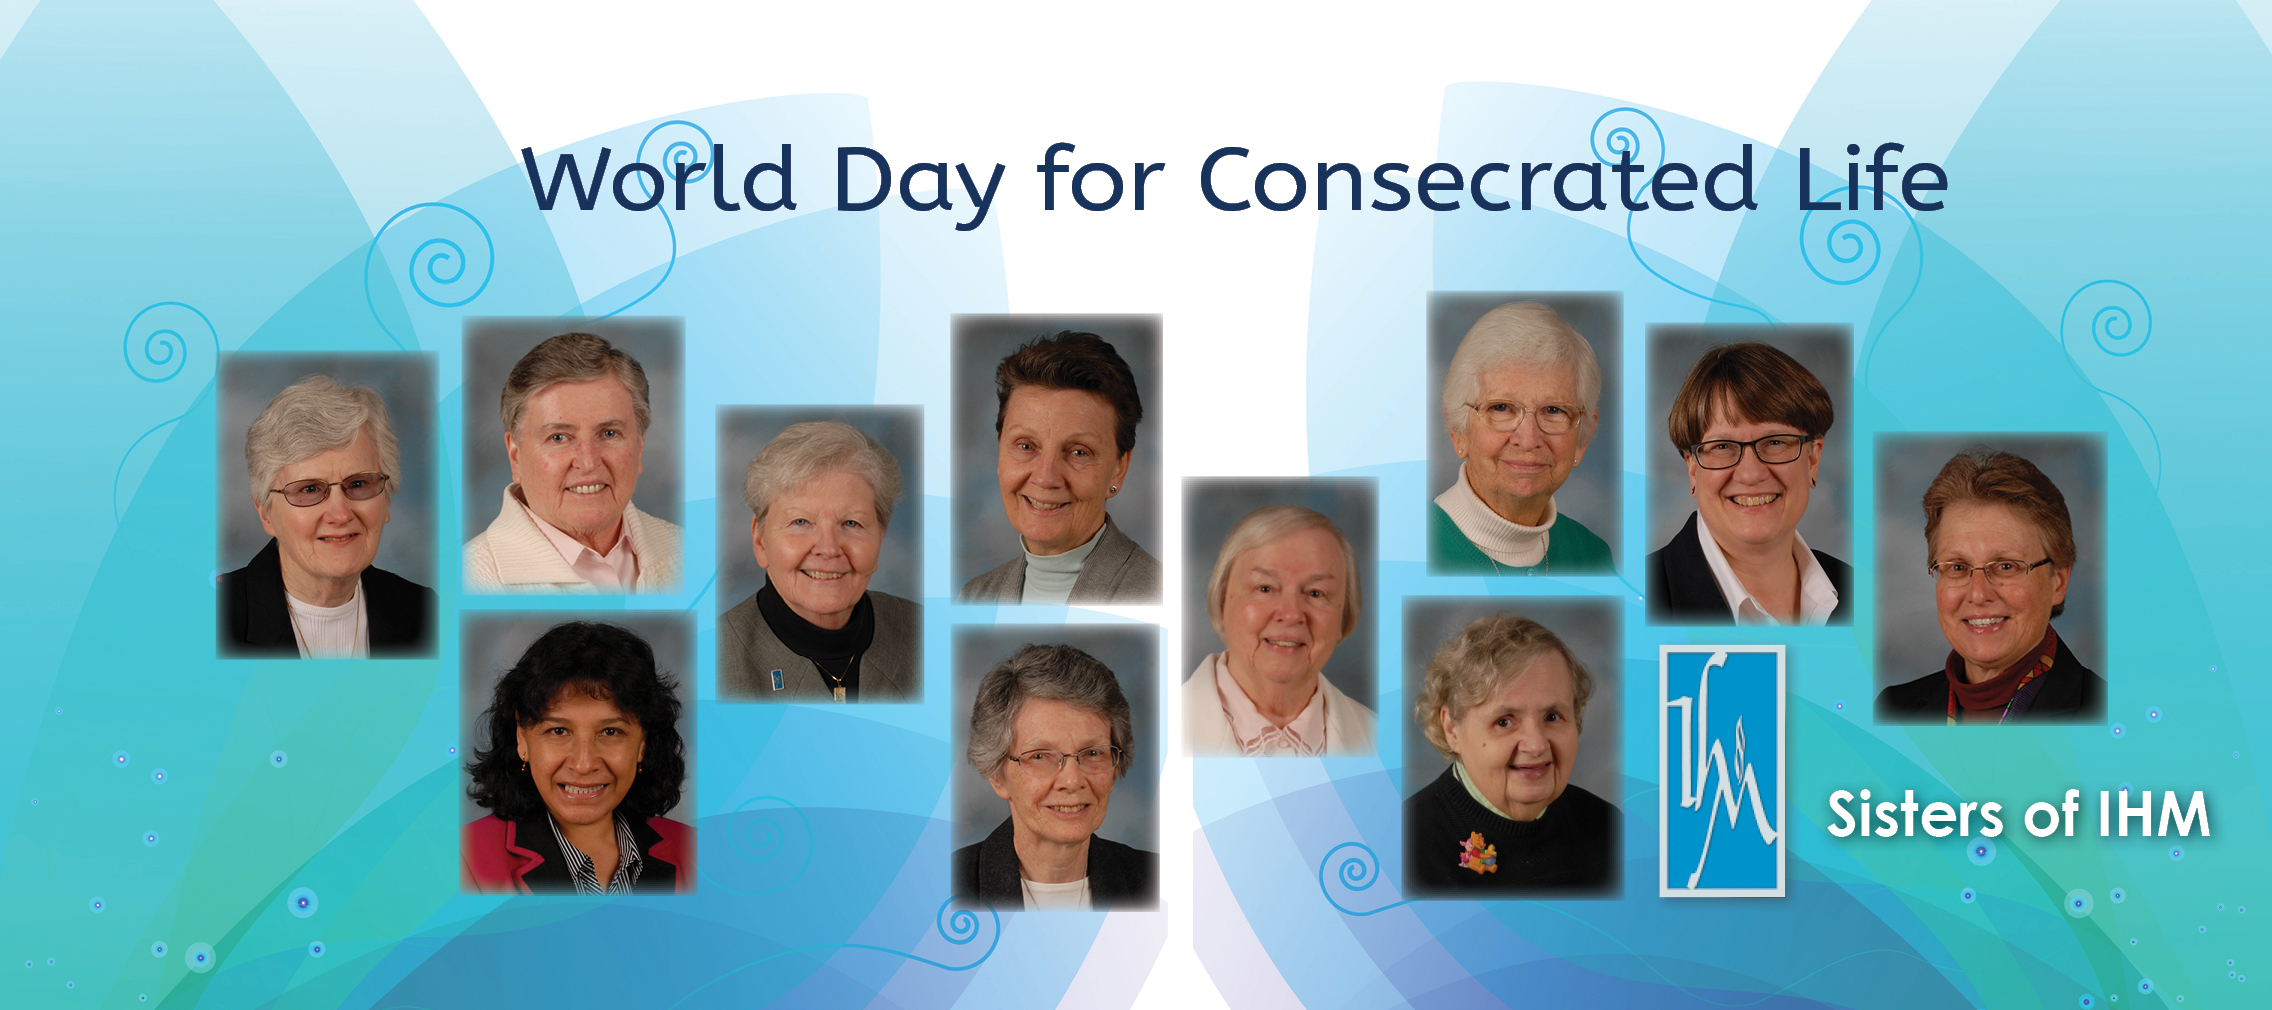 World Day for Consecrated Life